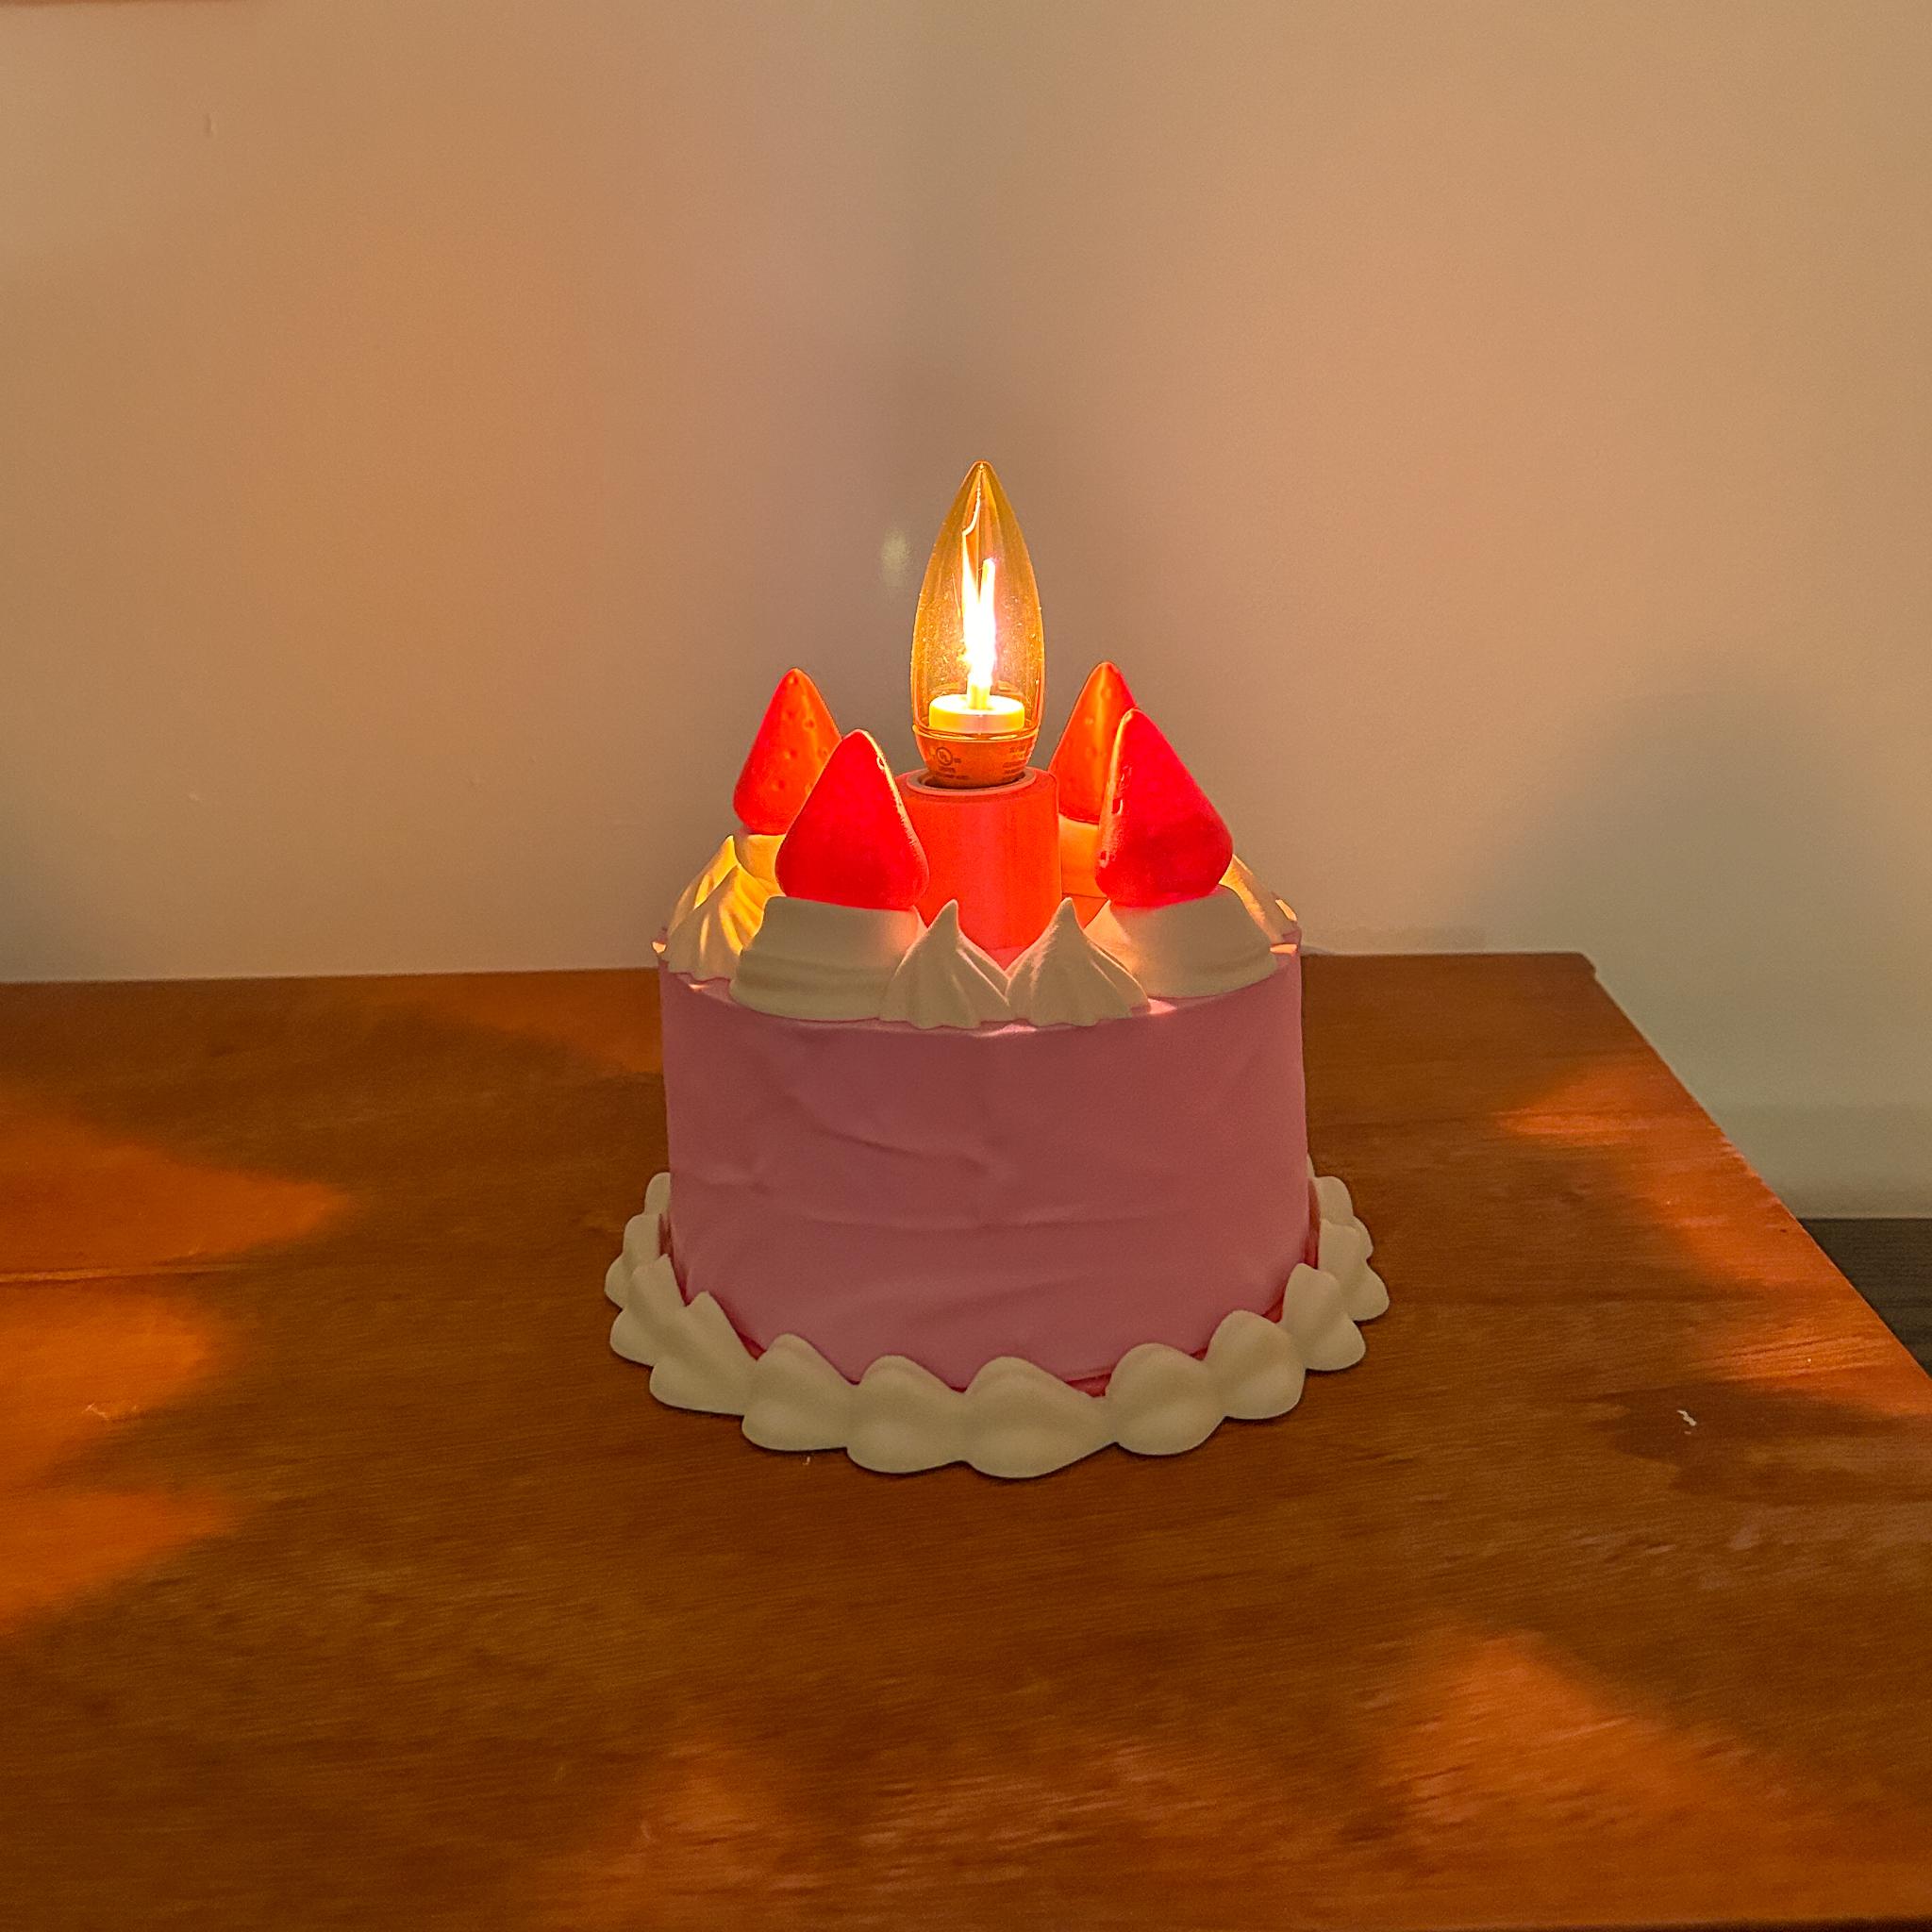 Cake Lamp - Kitsch, Vintage, Compatible with IKEA Strala Lamp 3d model